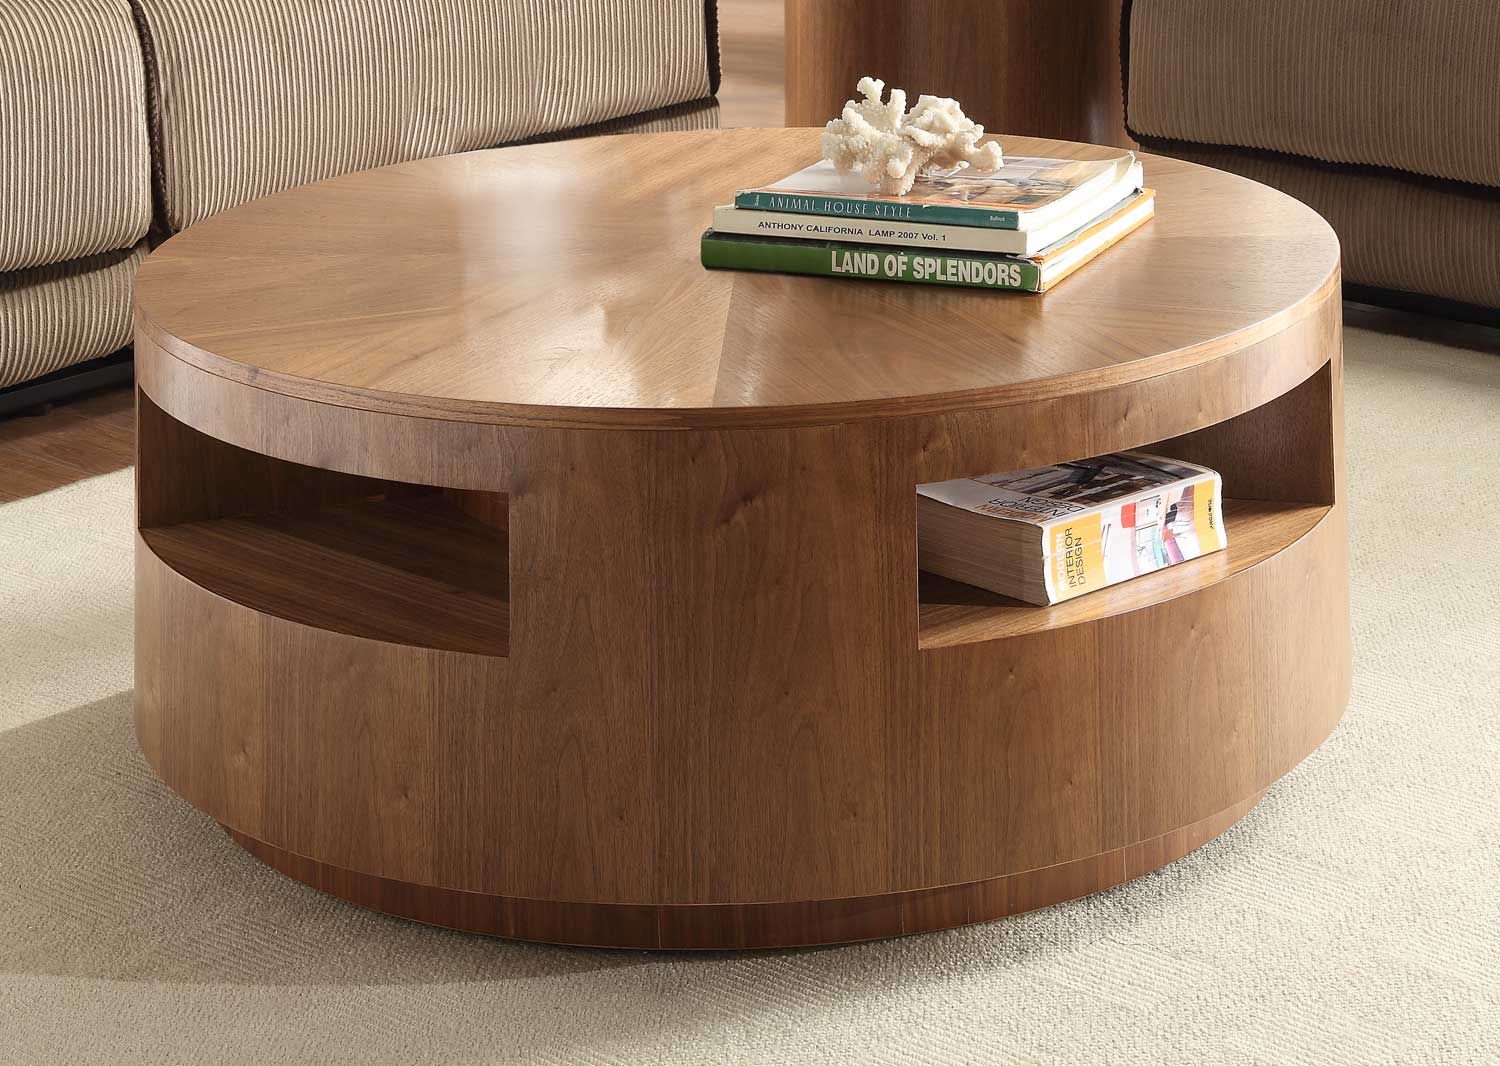 The Round Coffee Tables With Storage – The Simple And Compact Furniture Throughout Round Coffee Tables With Storage (View 2 of 15)